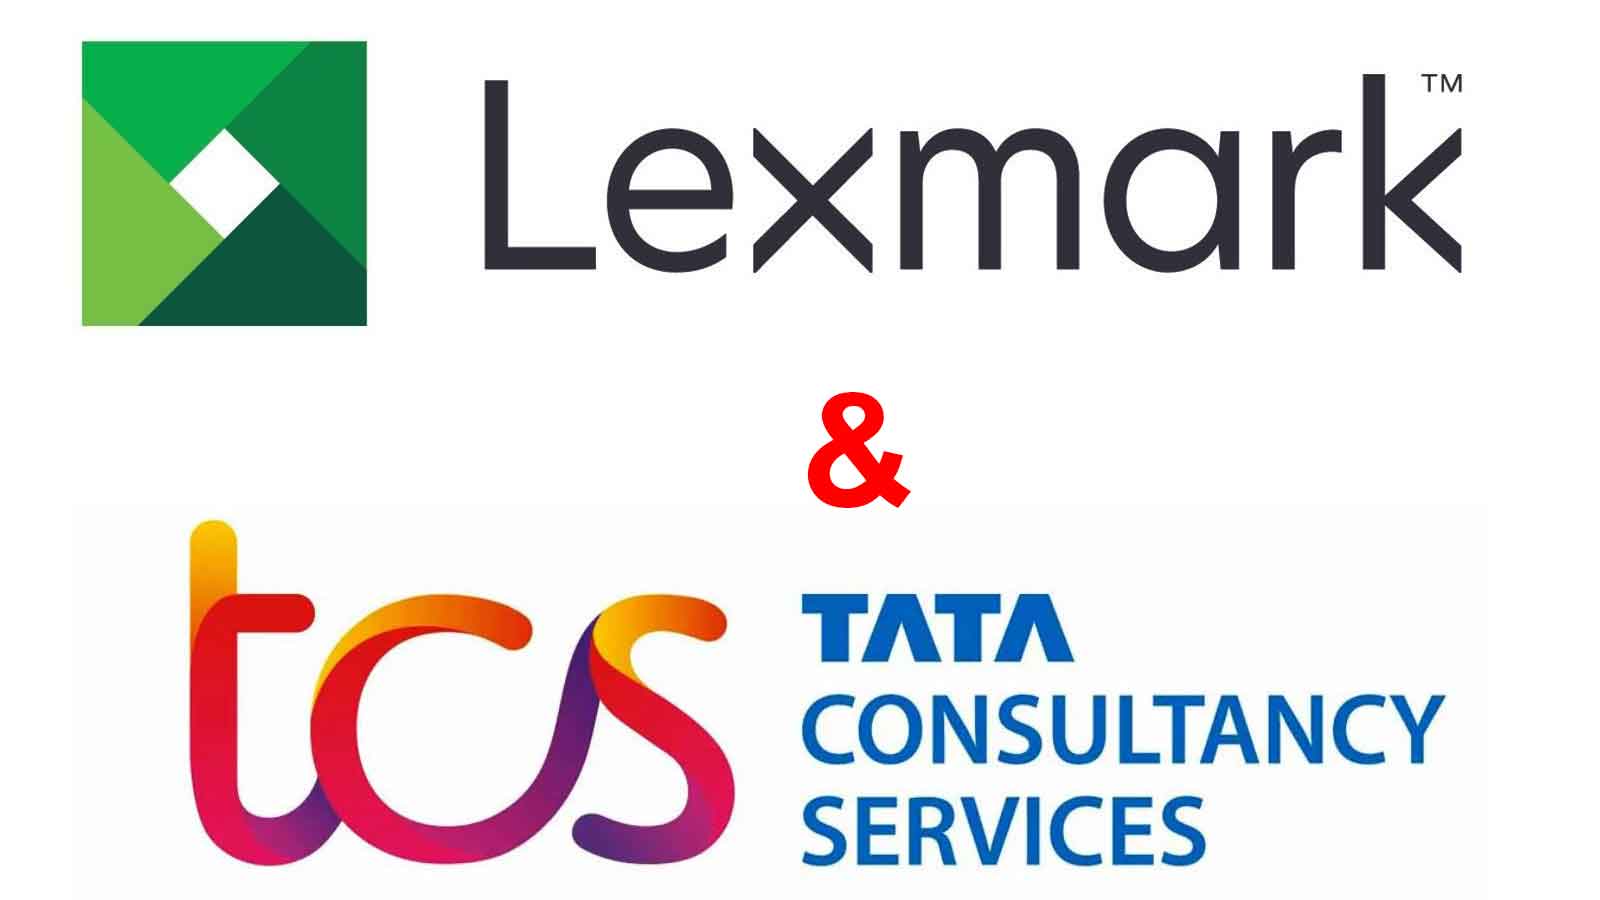 Lexmark Selects TCS to Transform its Digital Core to Deliver Faster Time to Market